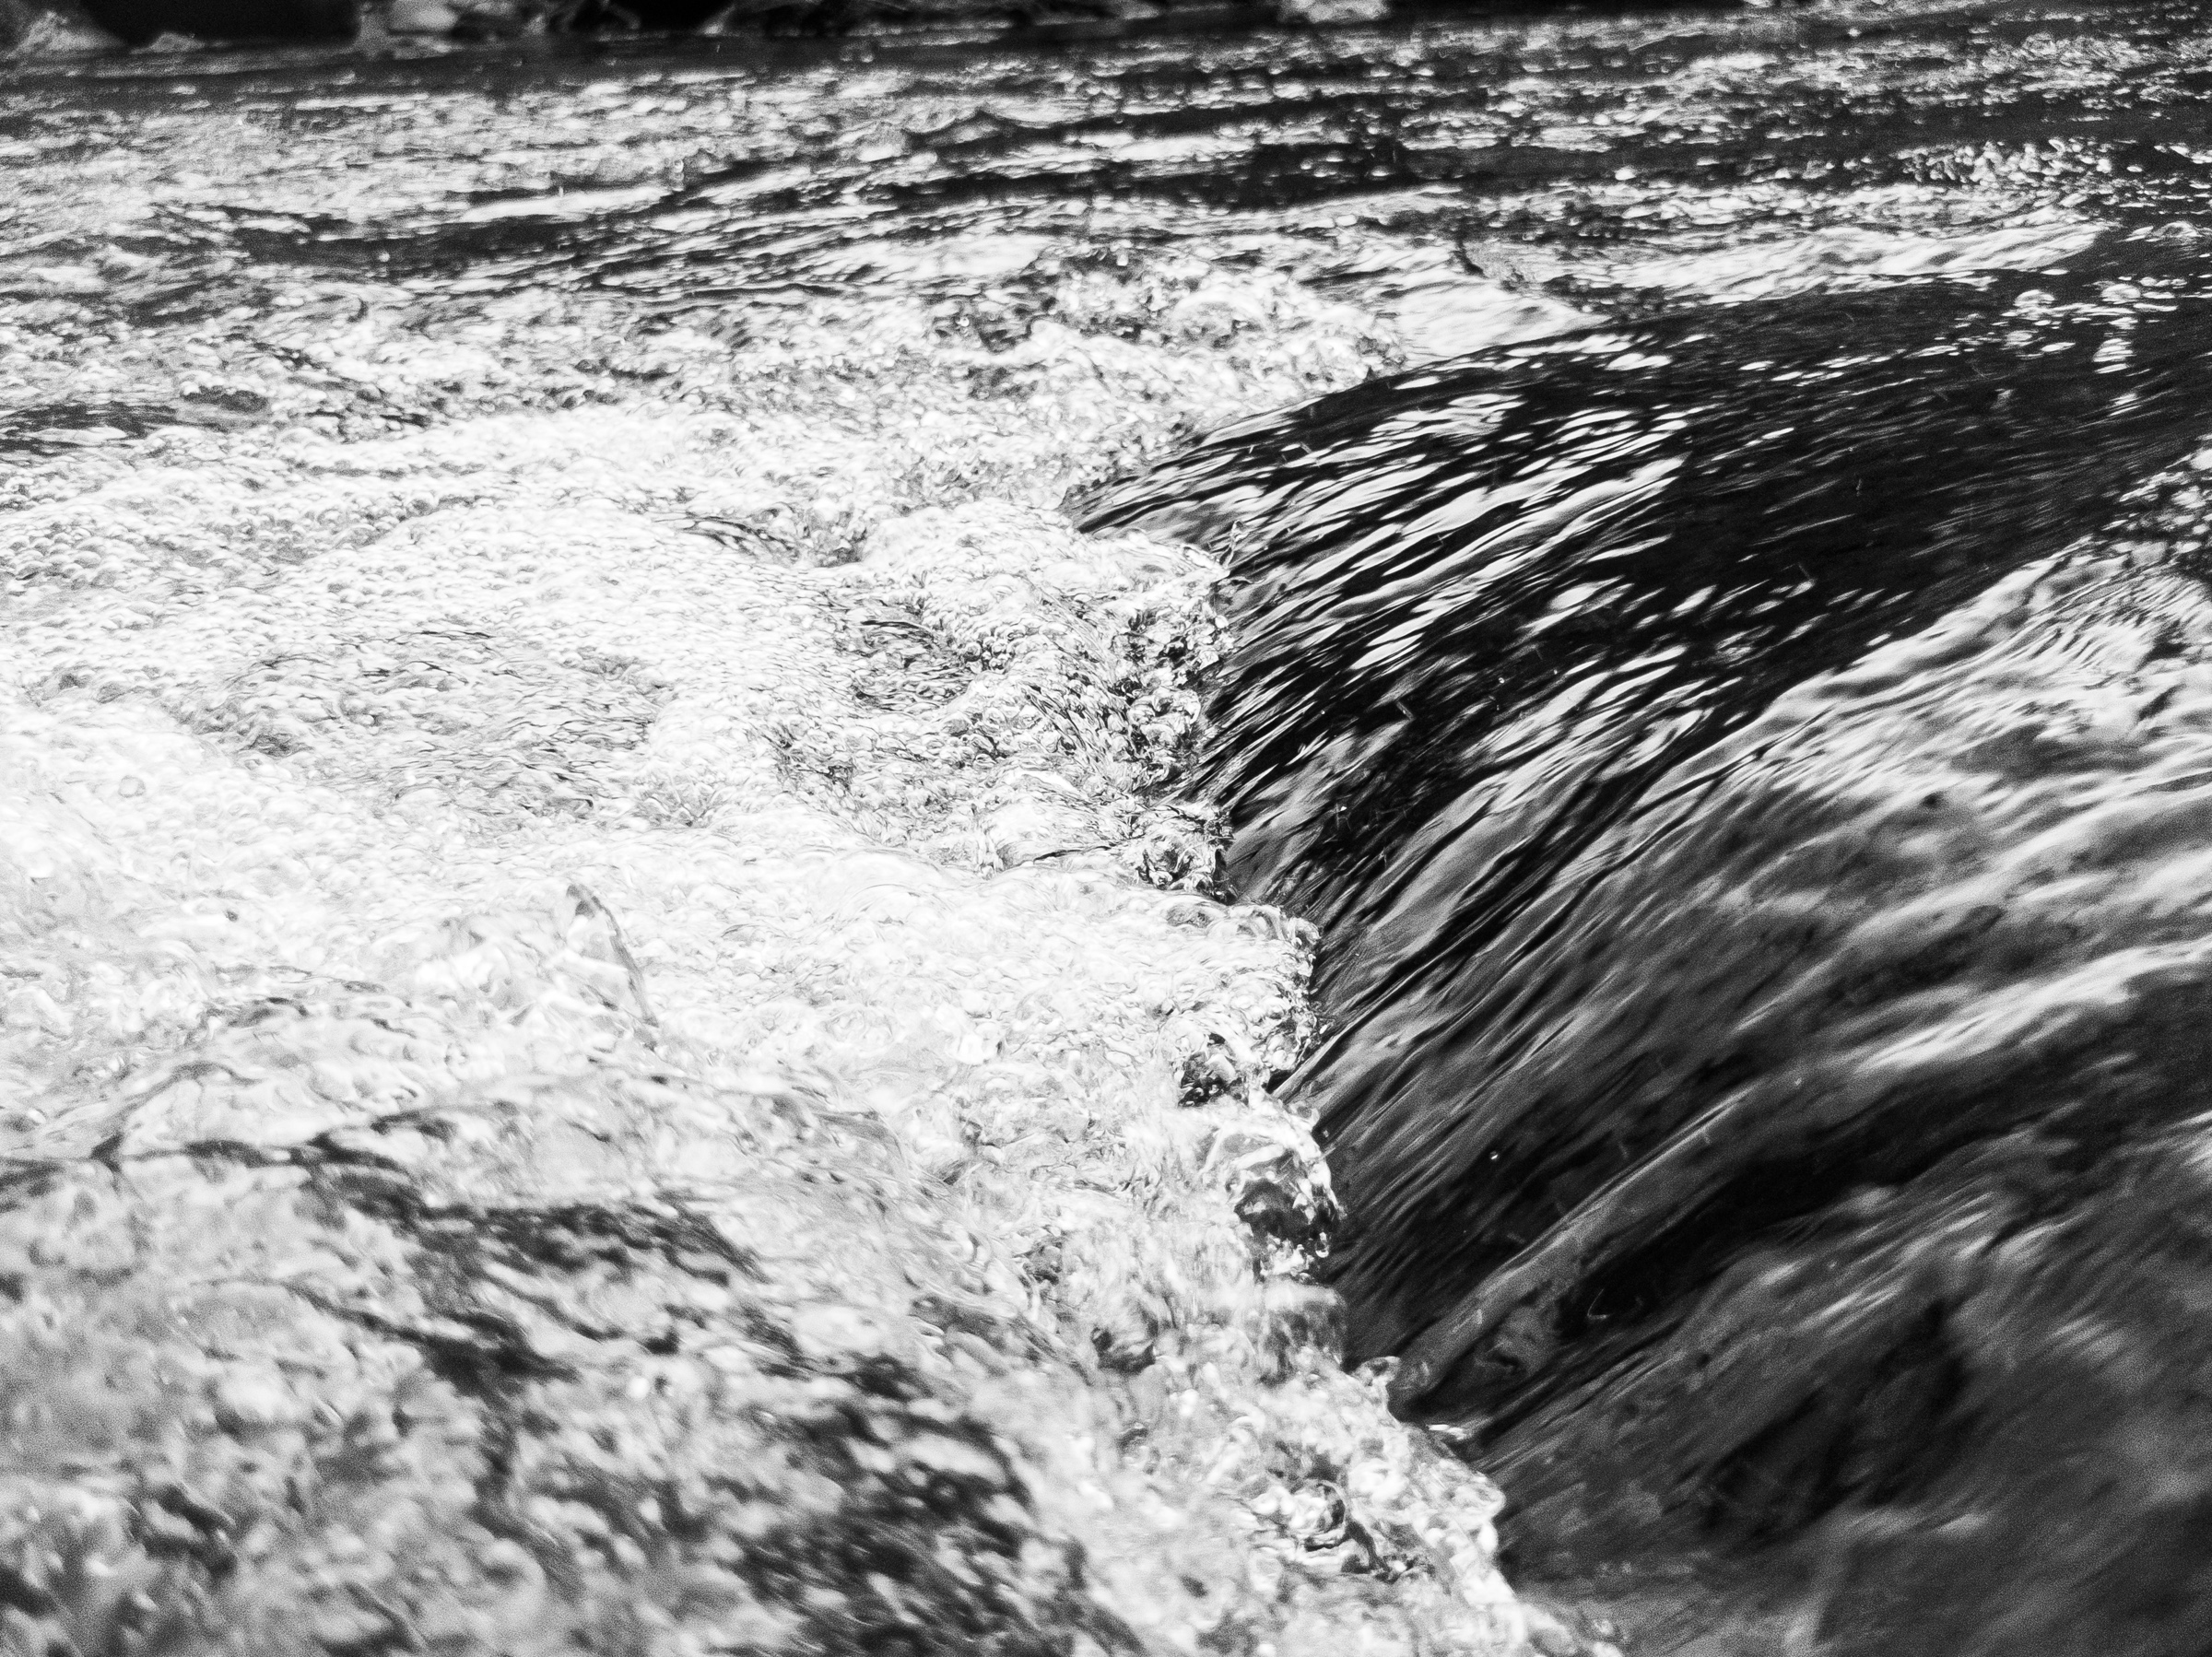 A close-up picture of a some froth on a tiny wave in black-and-white.